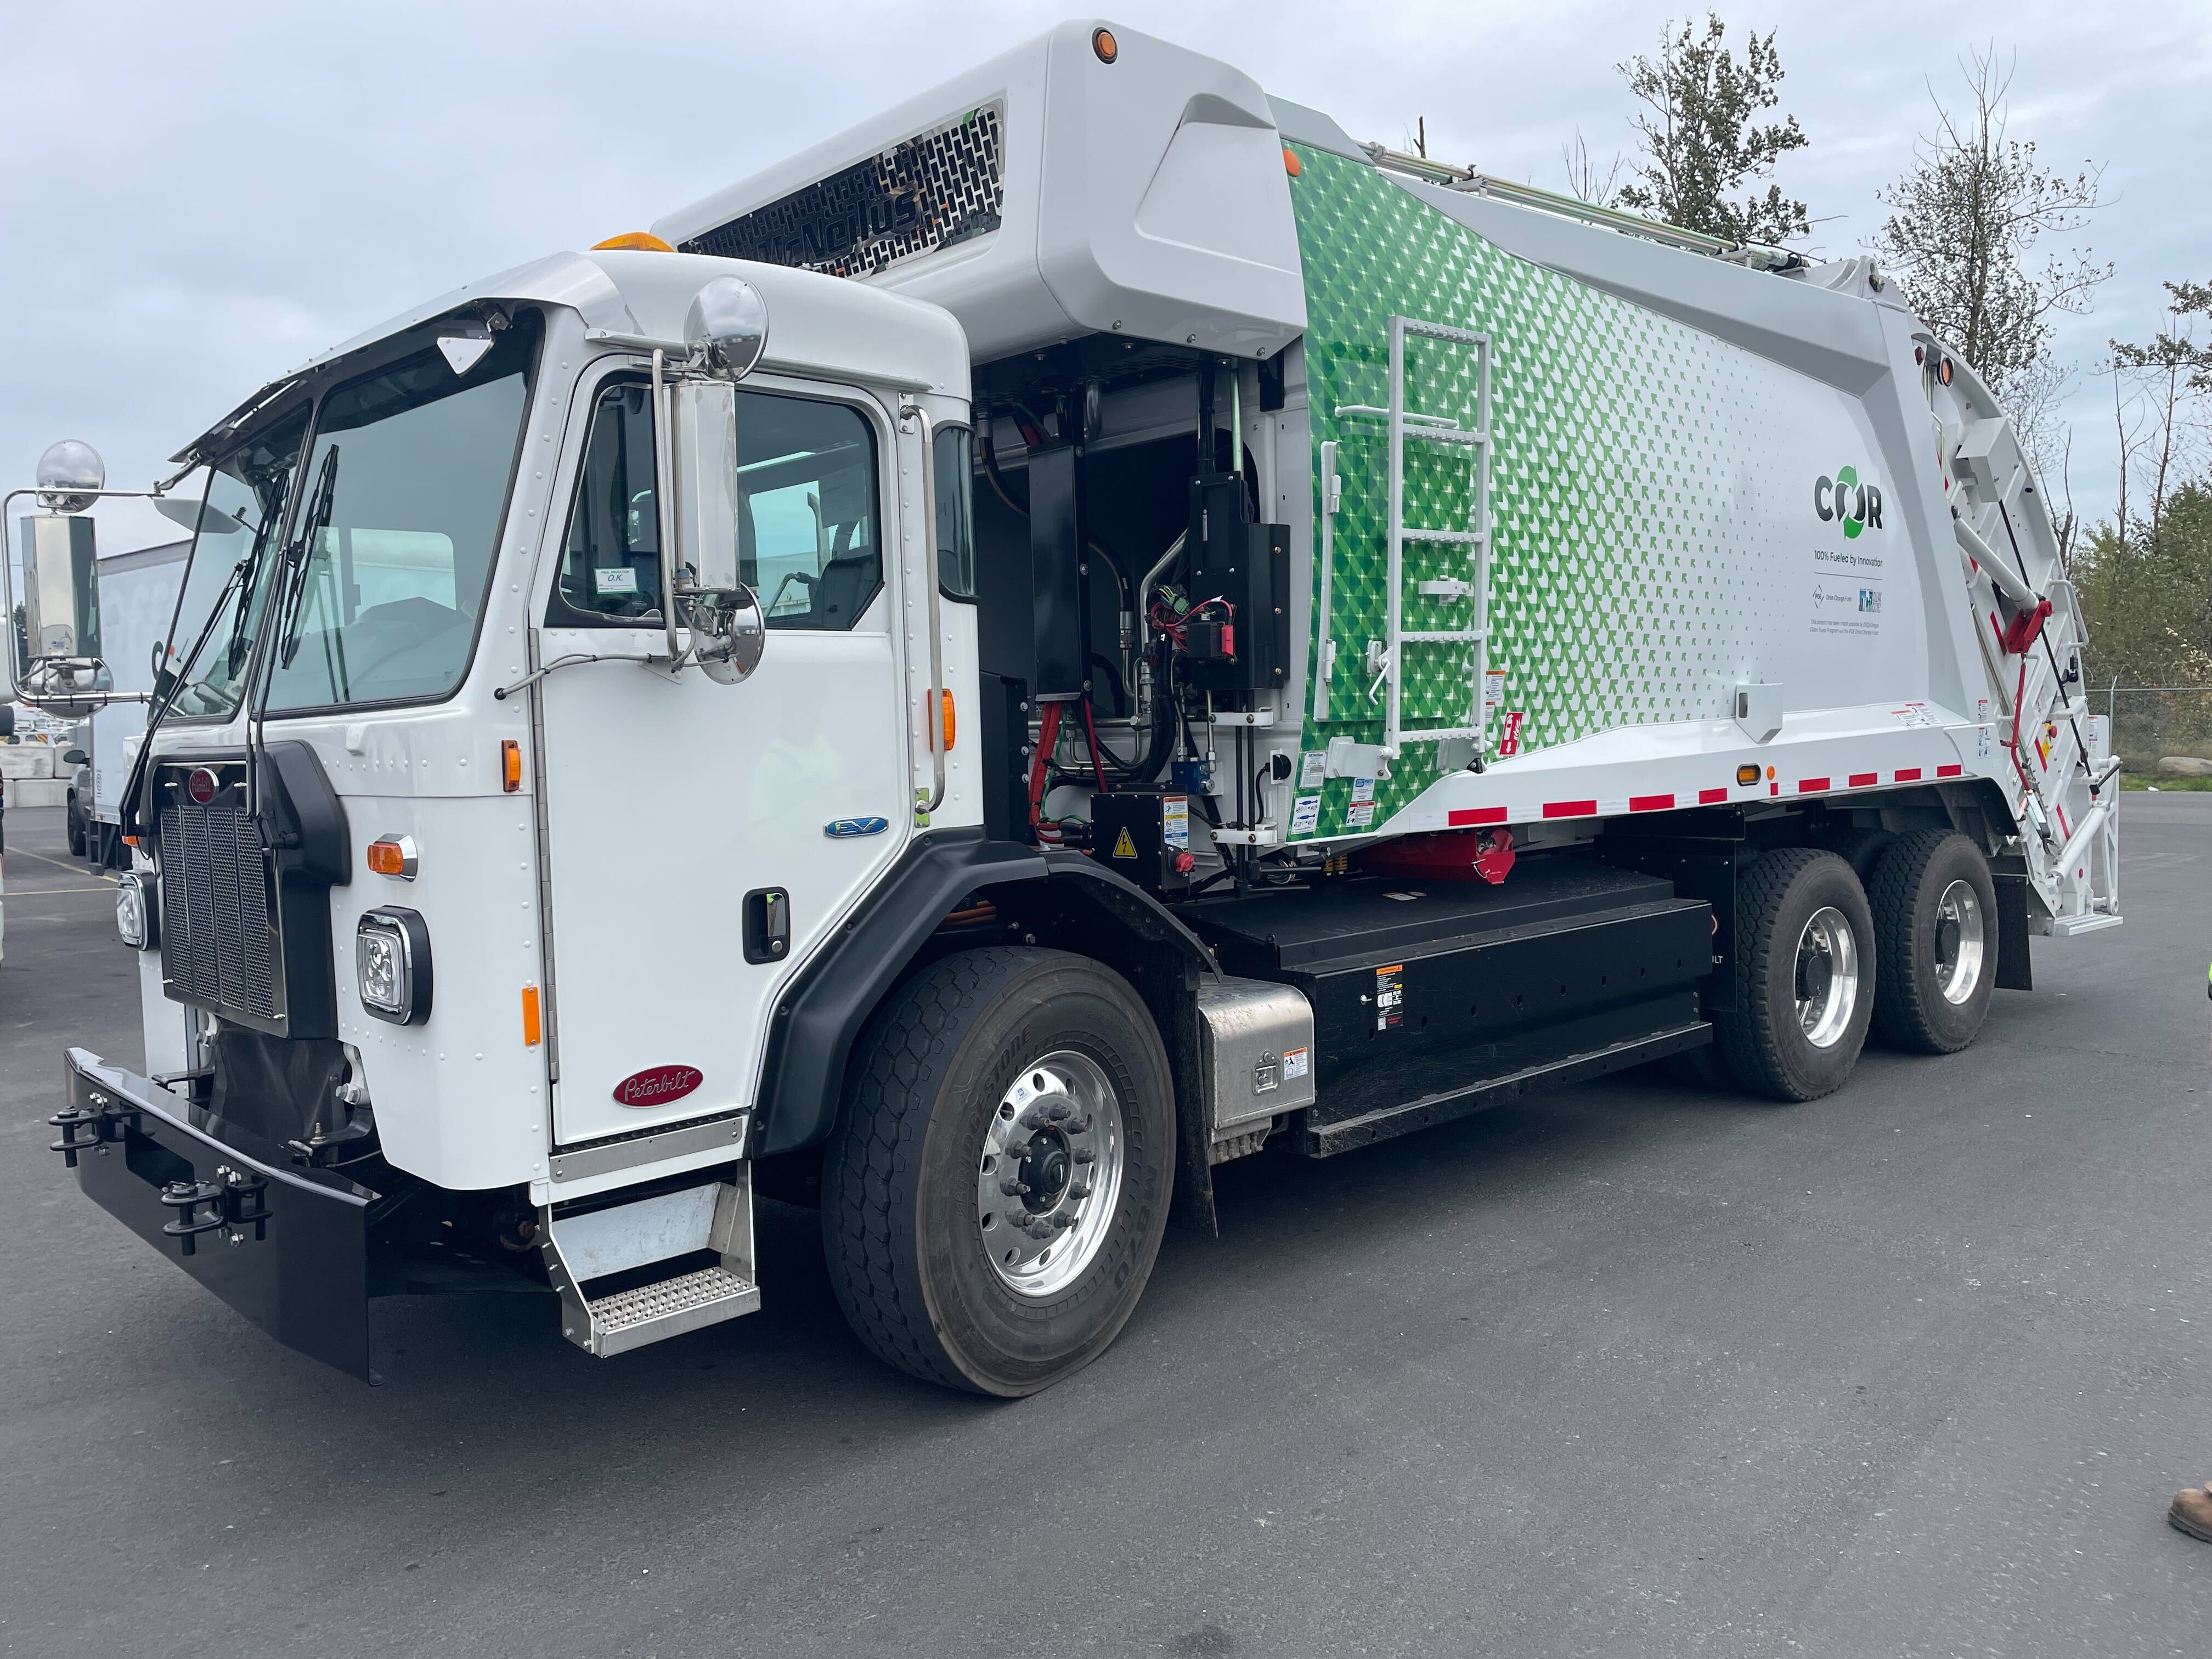 Portland\'s first electric garbage eastside truck soon hit - will OPB streets